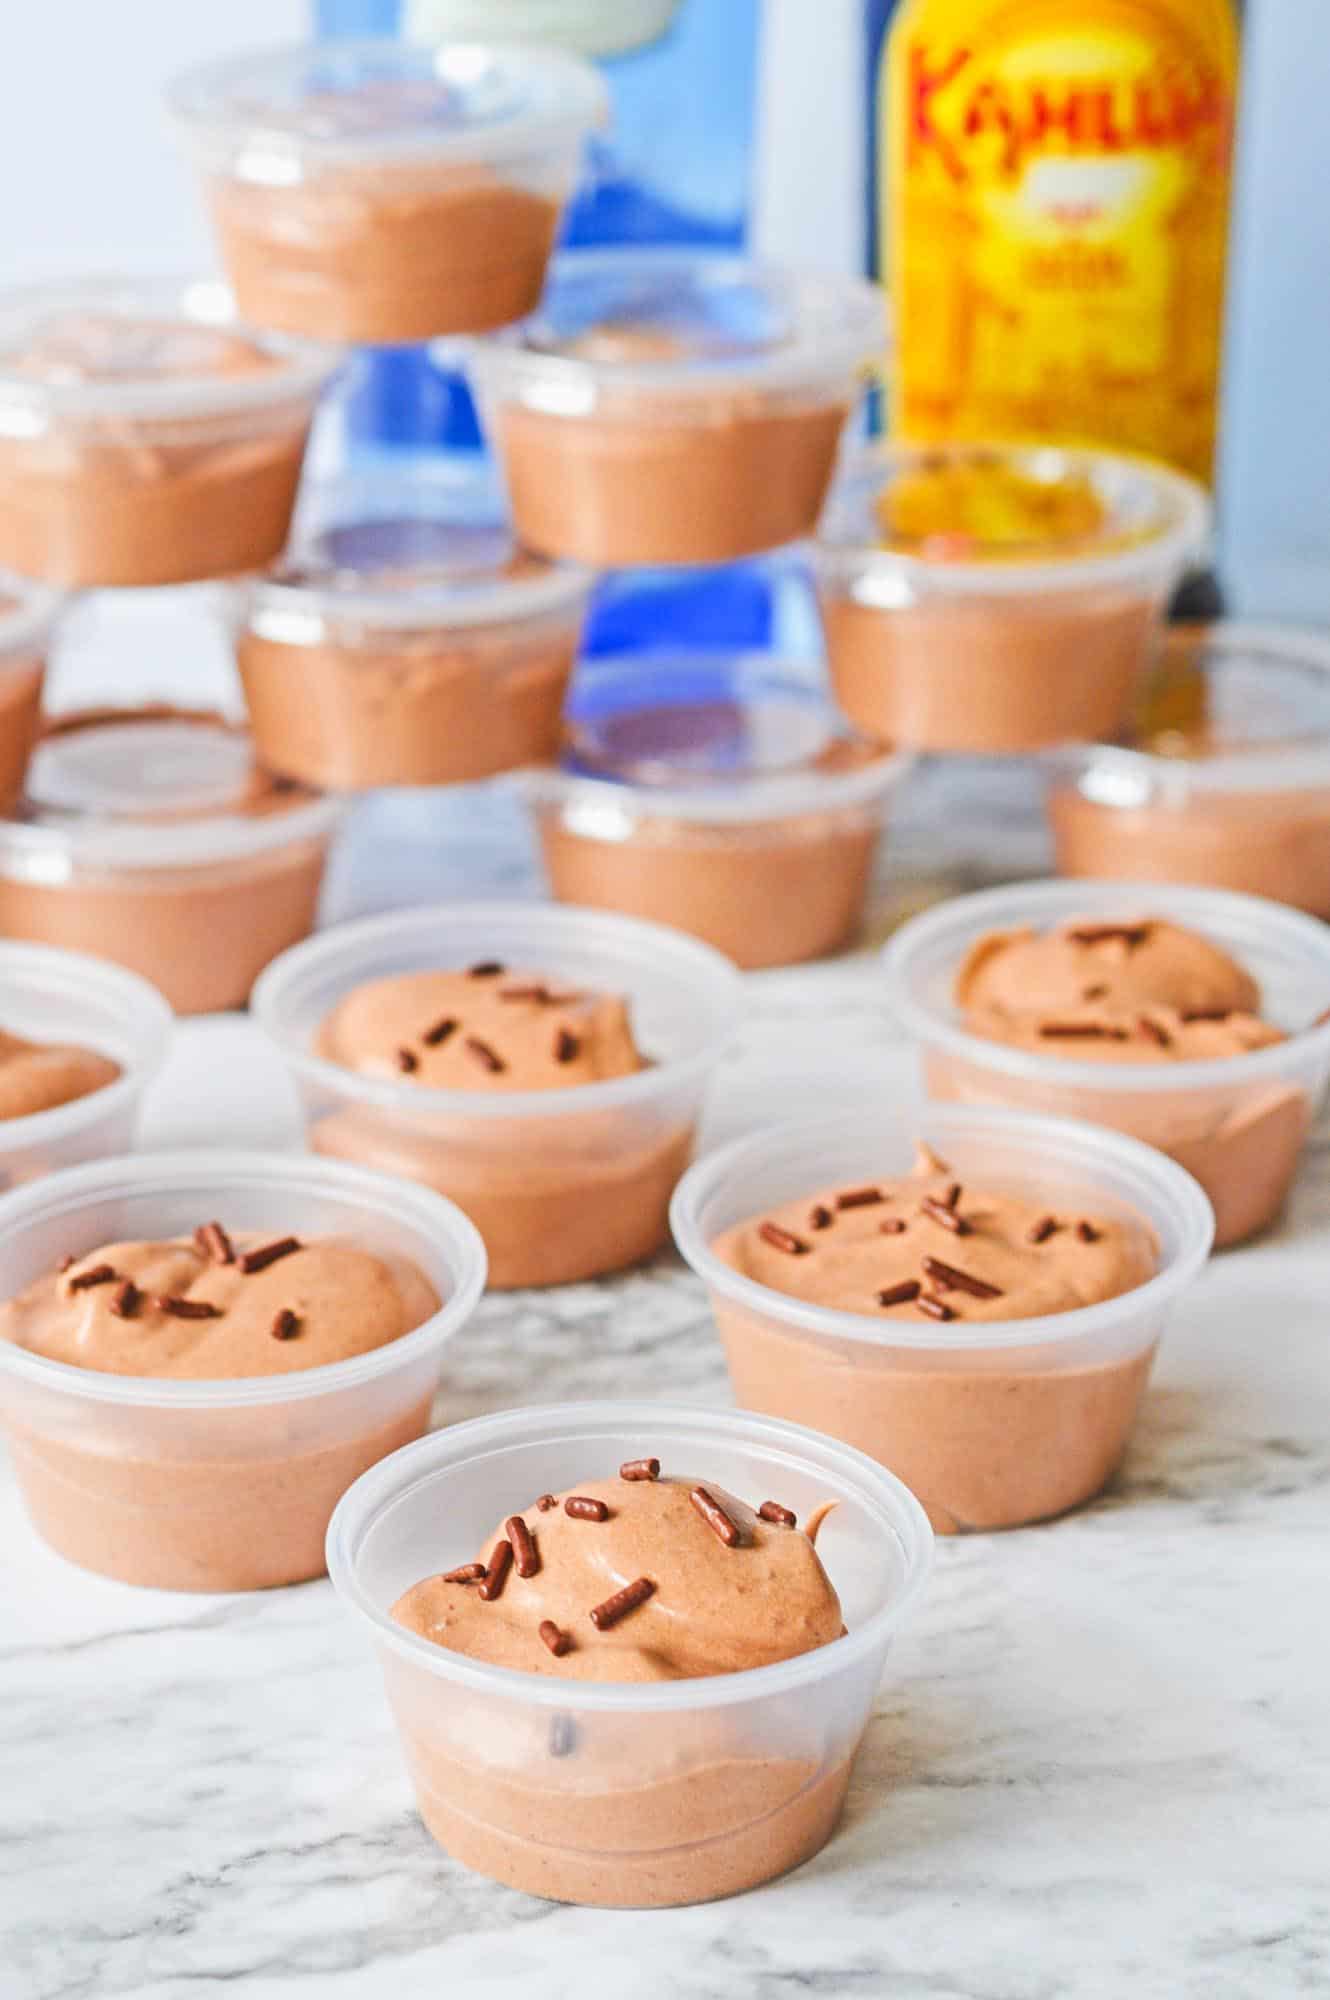 chocolate pudding shots in small plastic containers lined up on the counter. A bottle of kahlua is in the background